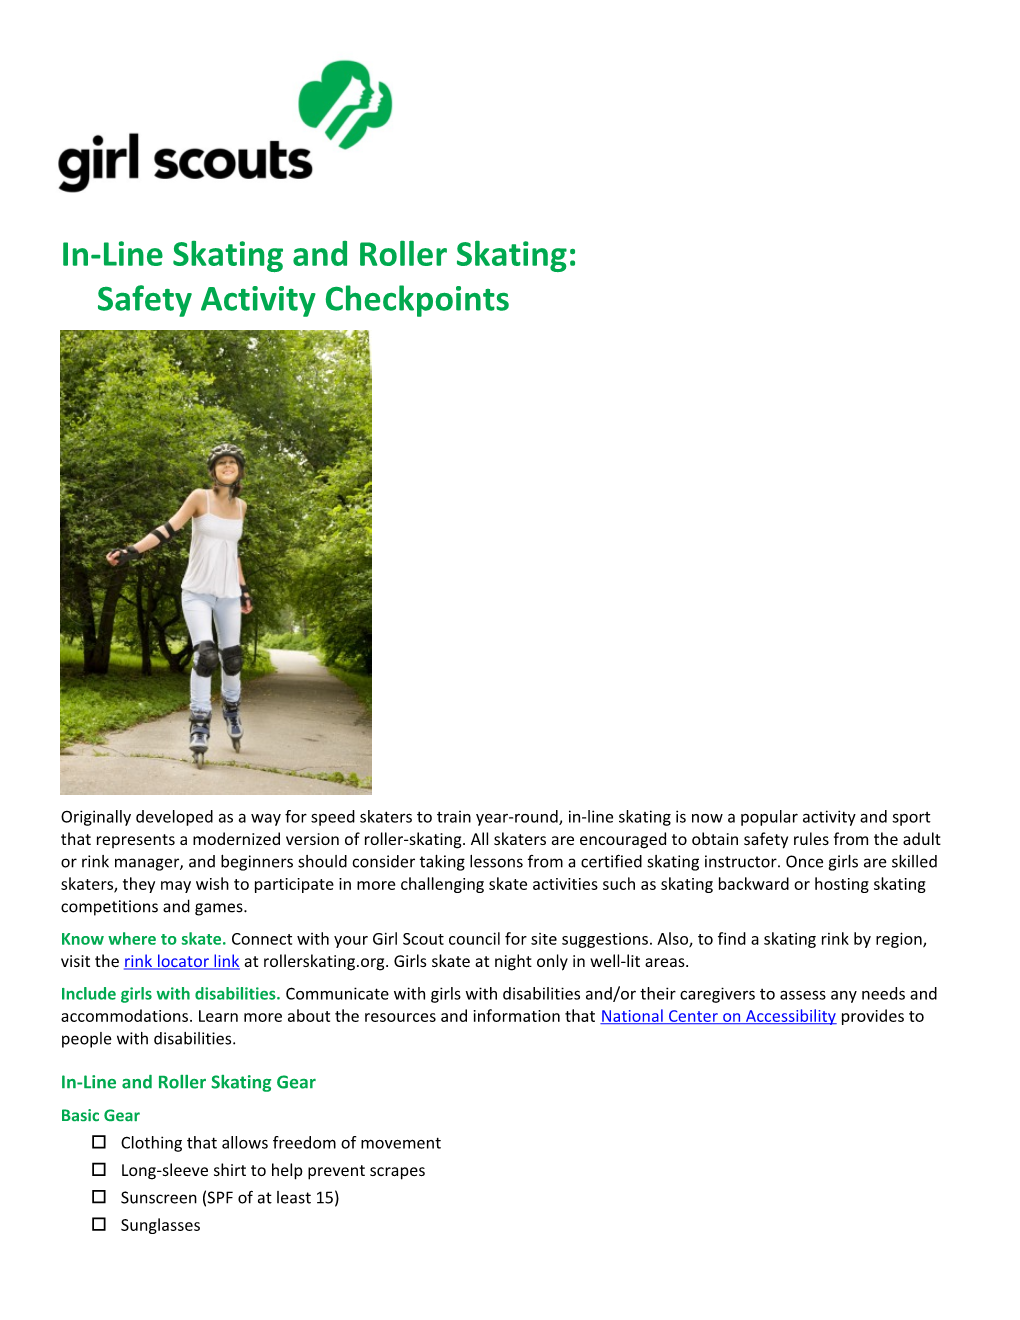 In-Line Skating and Roller Skating:Safety Activity Checkpoints